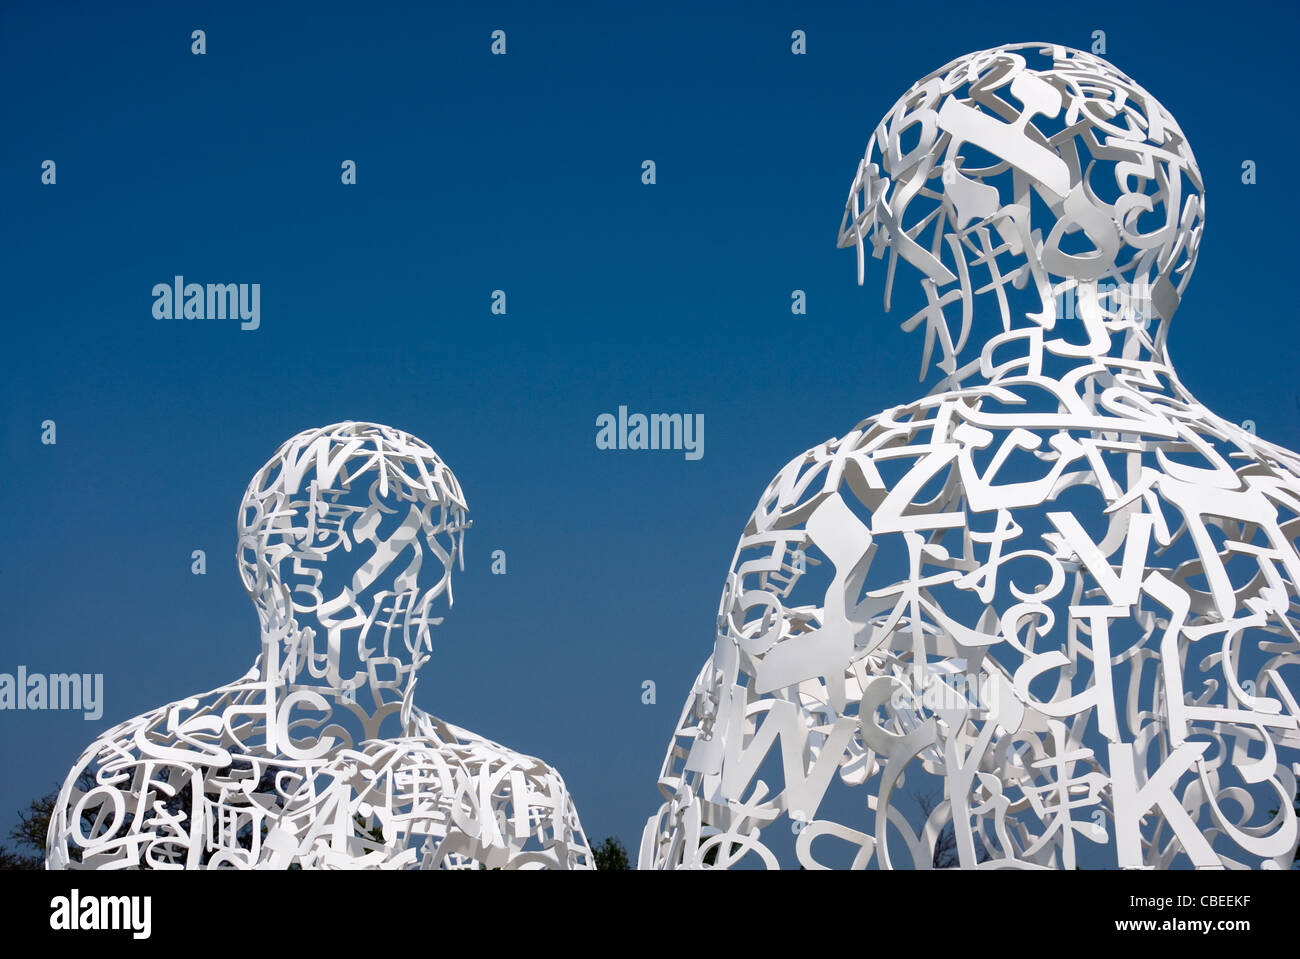 Jaume Plensa Sculpture, Two Seated Figures Formed from a Mesh of White Letters, Yorkshire Sculpture Park, UK Stock Photo